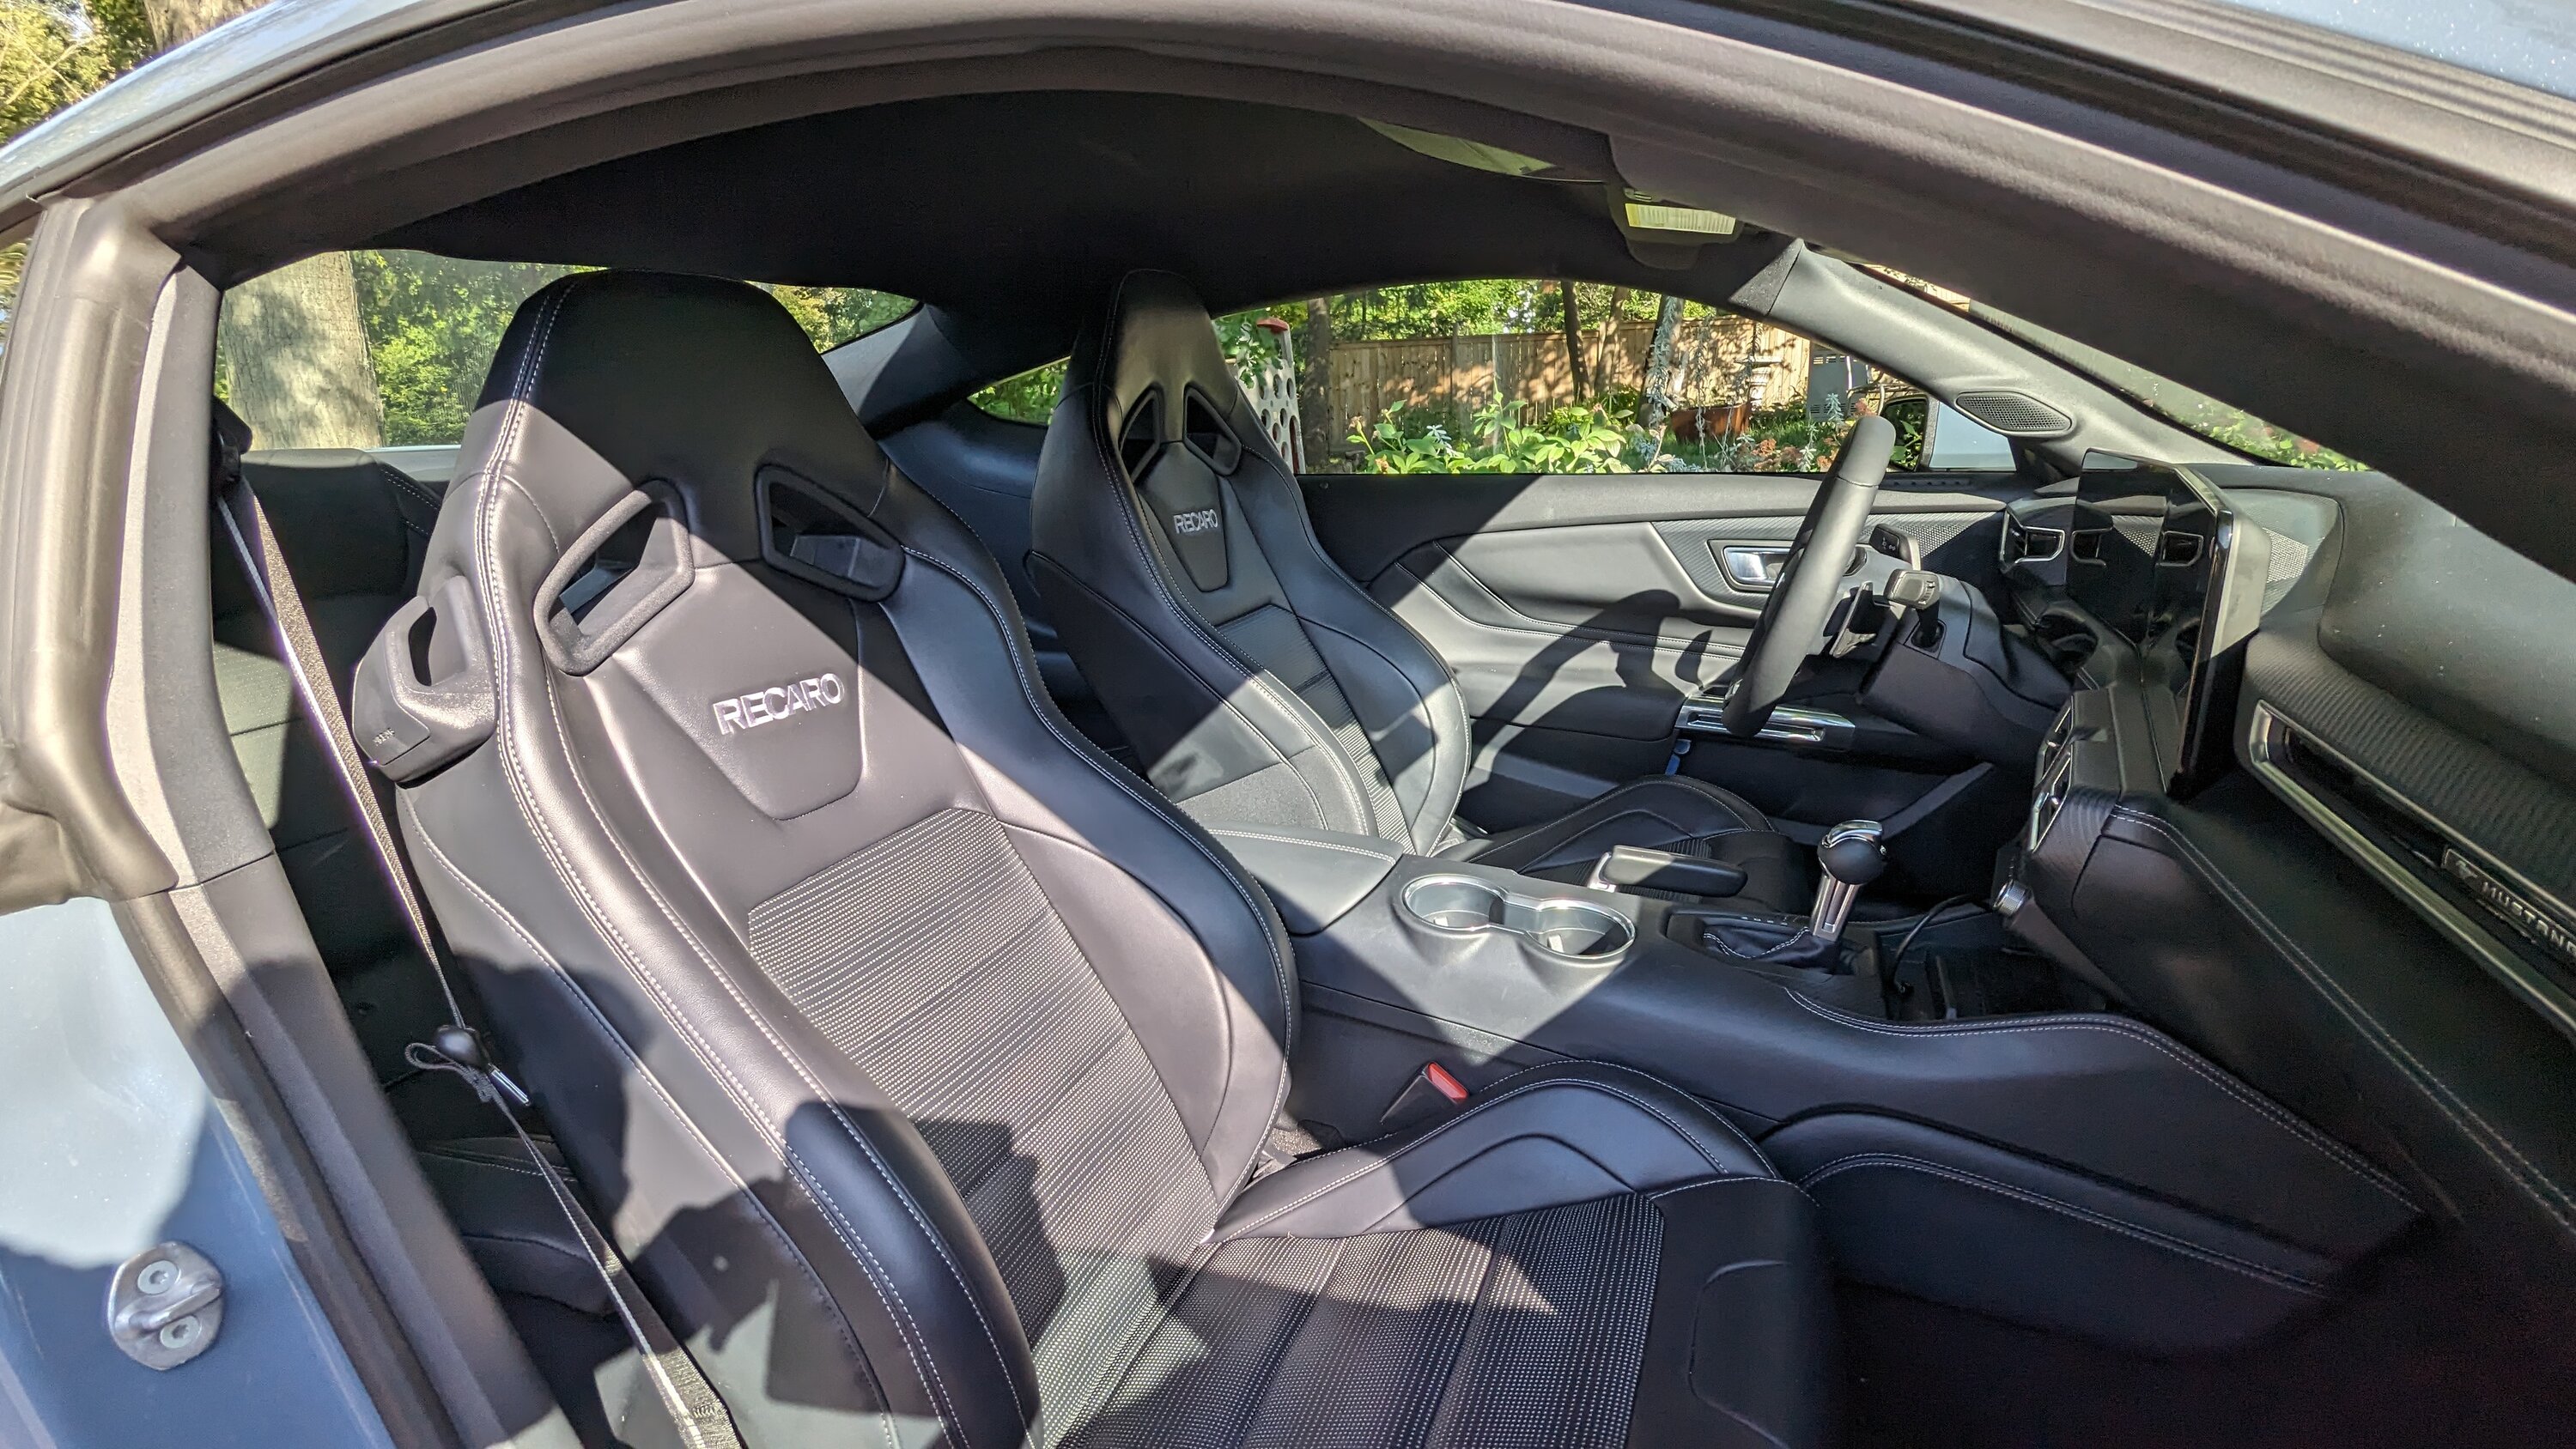 S650 Mustang Let’s post interior photos here! PXL_20231002_201603177